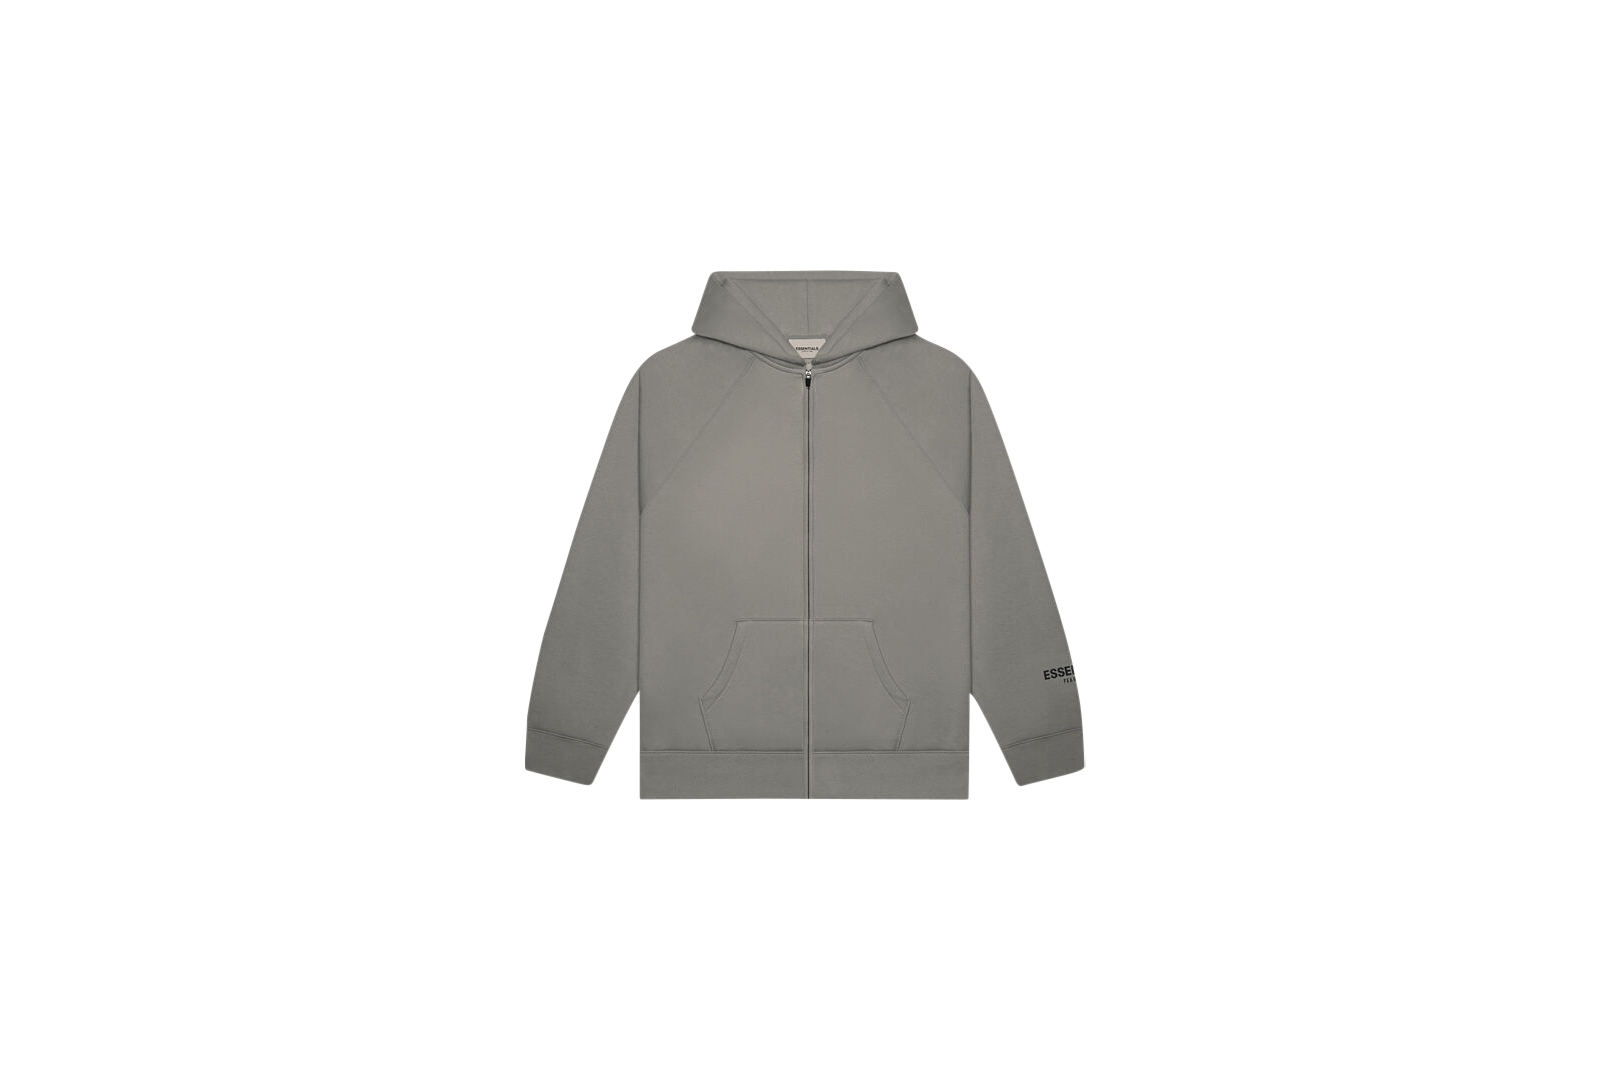 Fear of God Essentials 3D Silicon Applique Full Zip Up Hoodie Gray